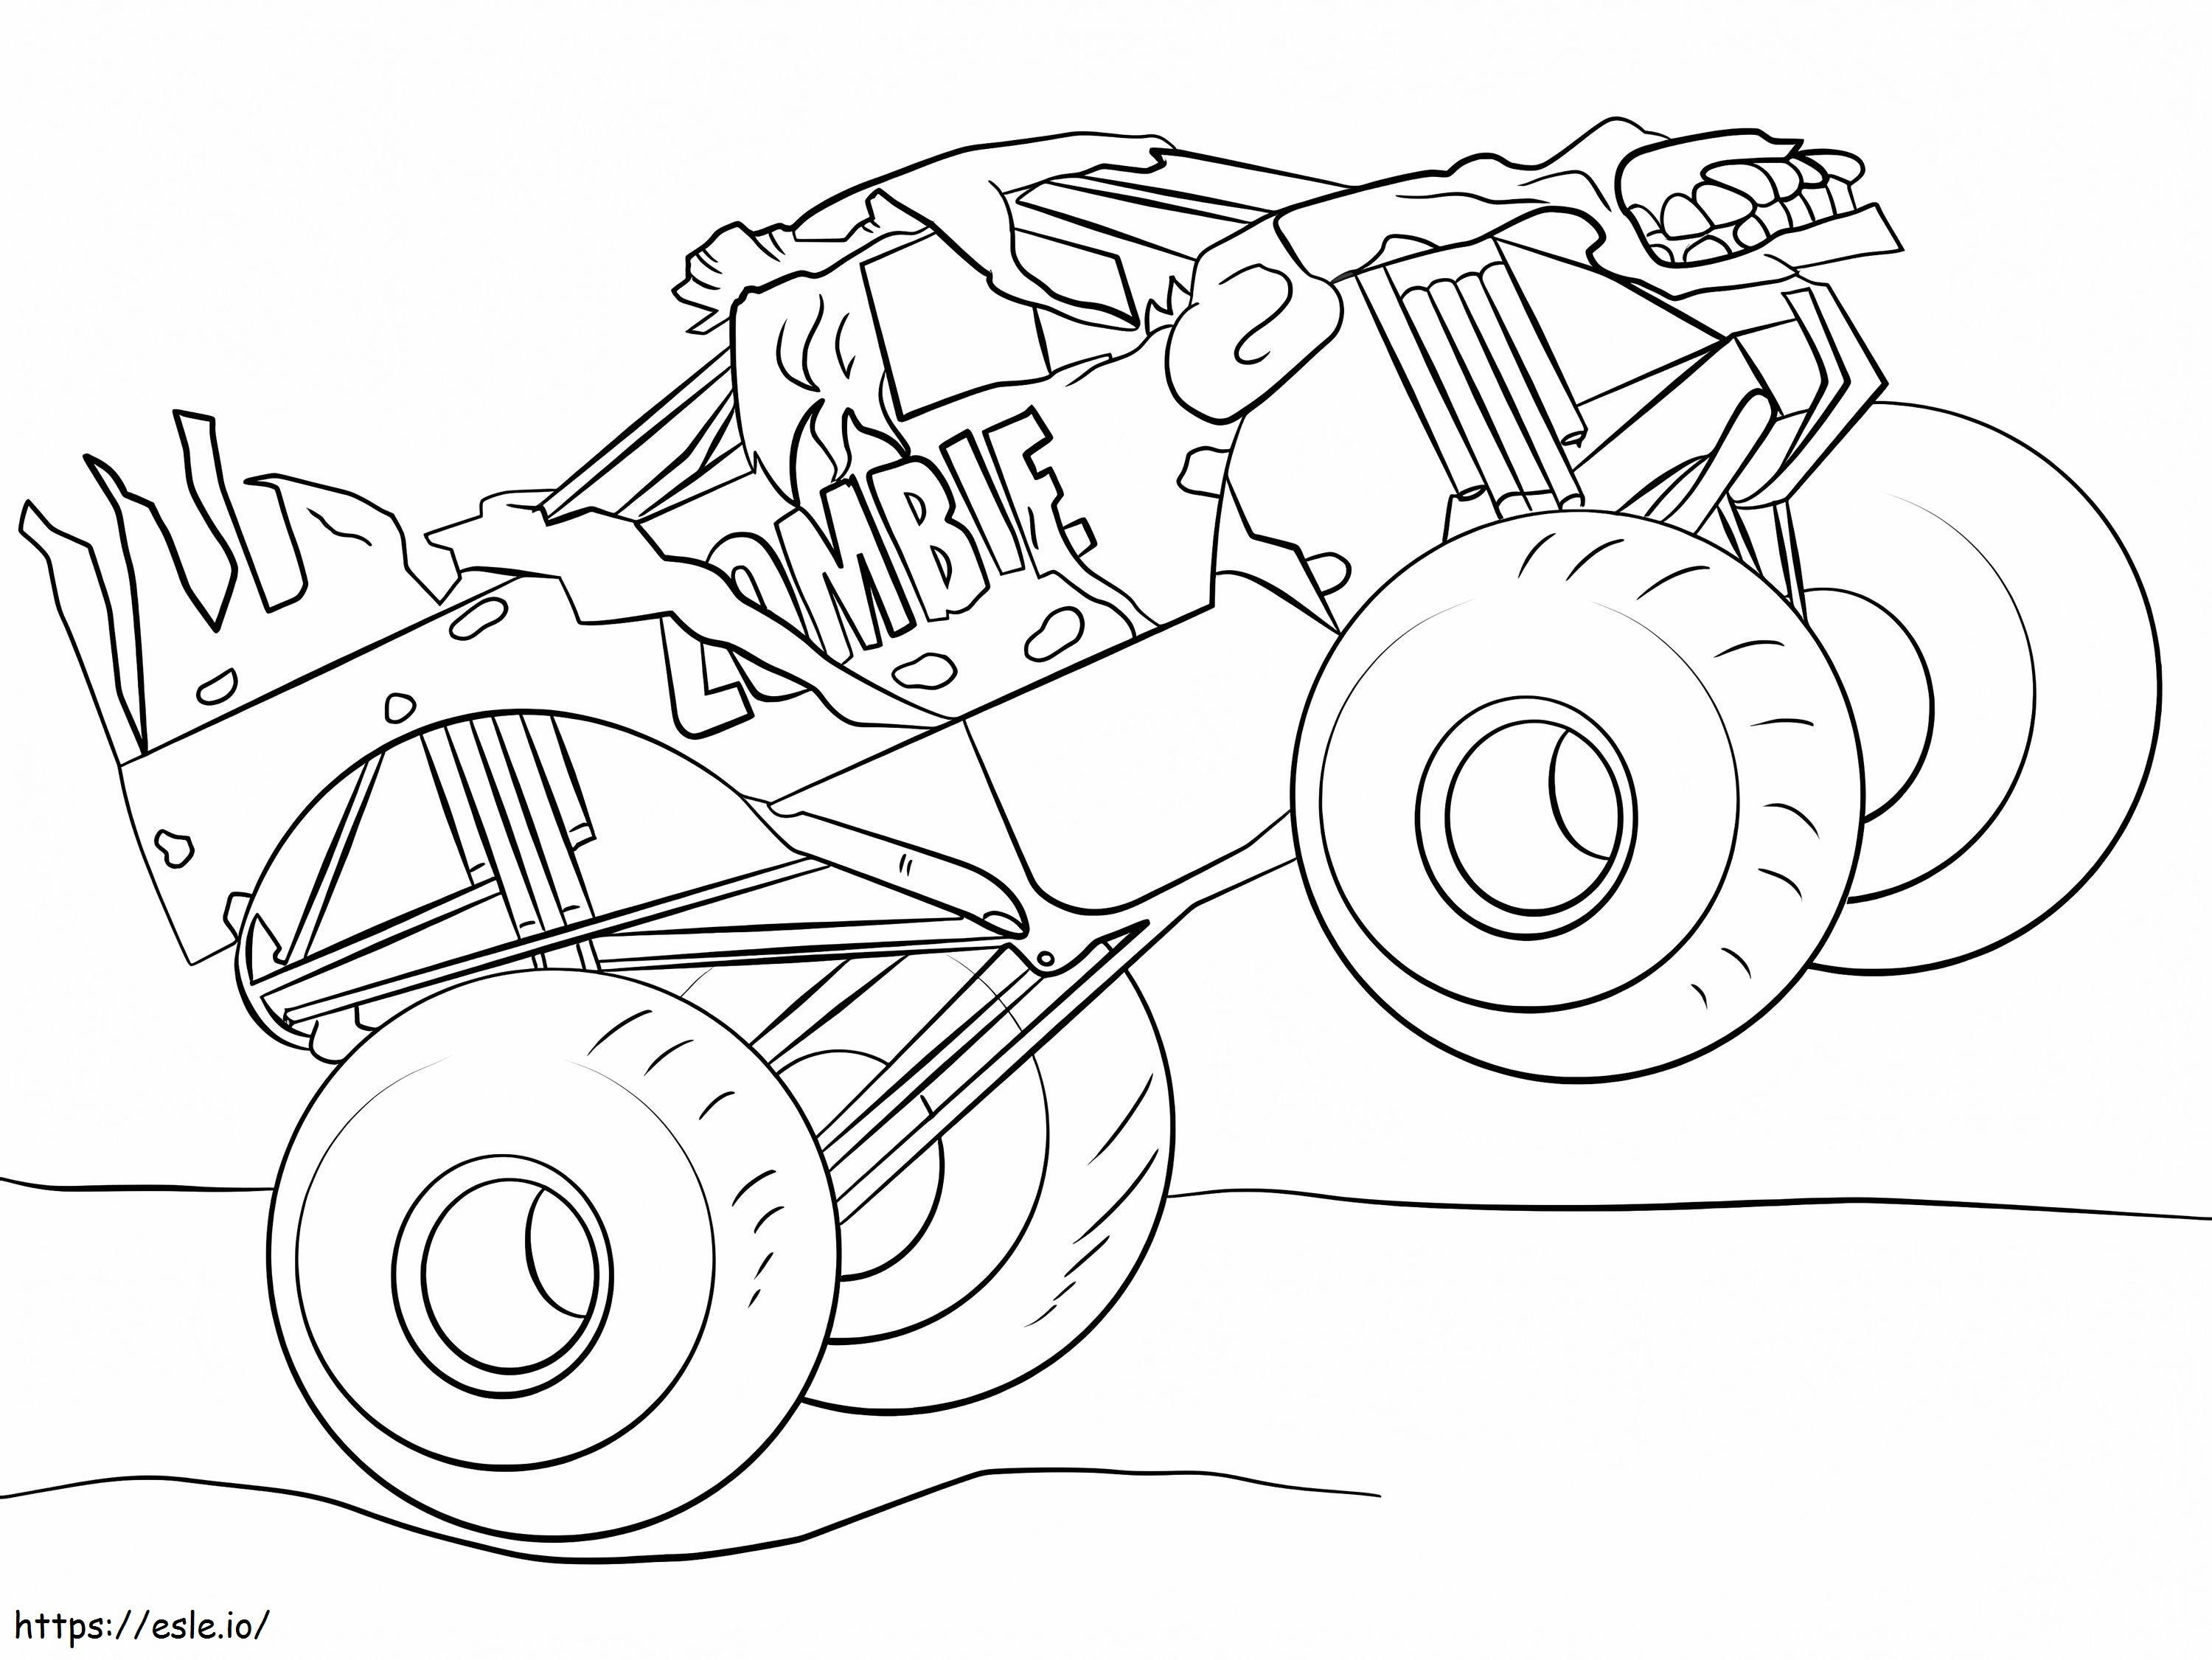 Zombie Monster Truck coloring page